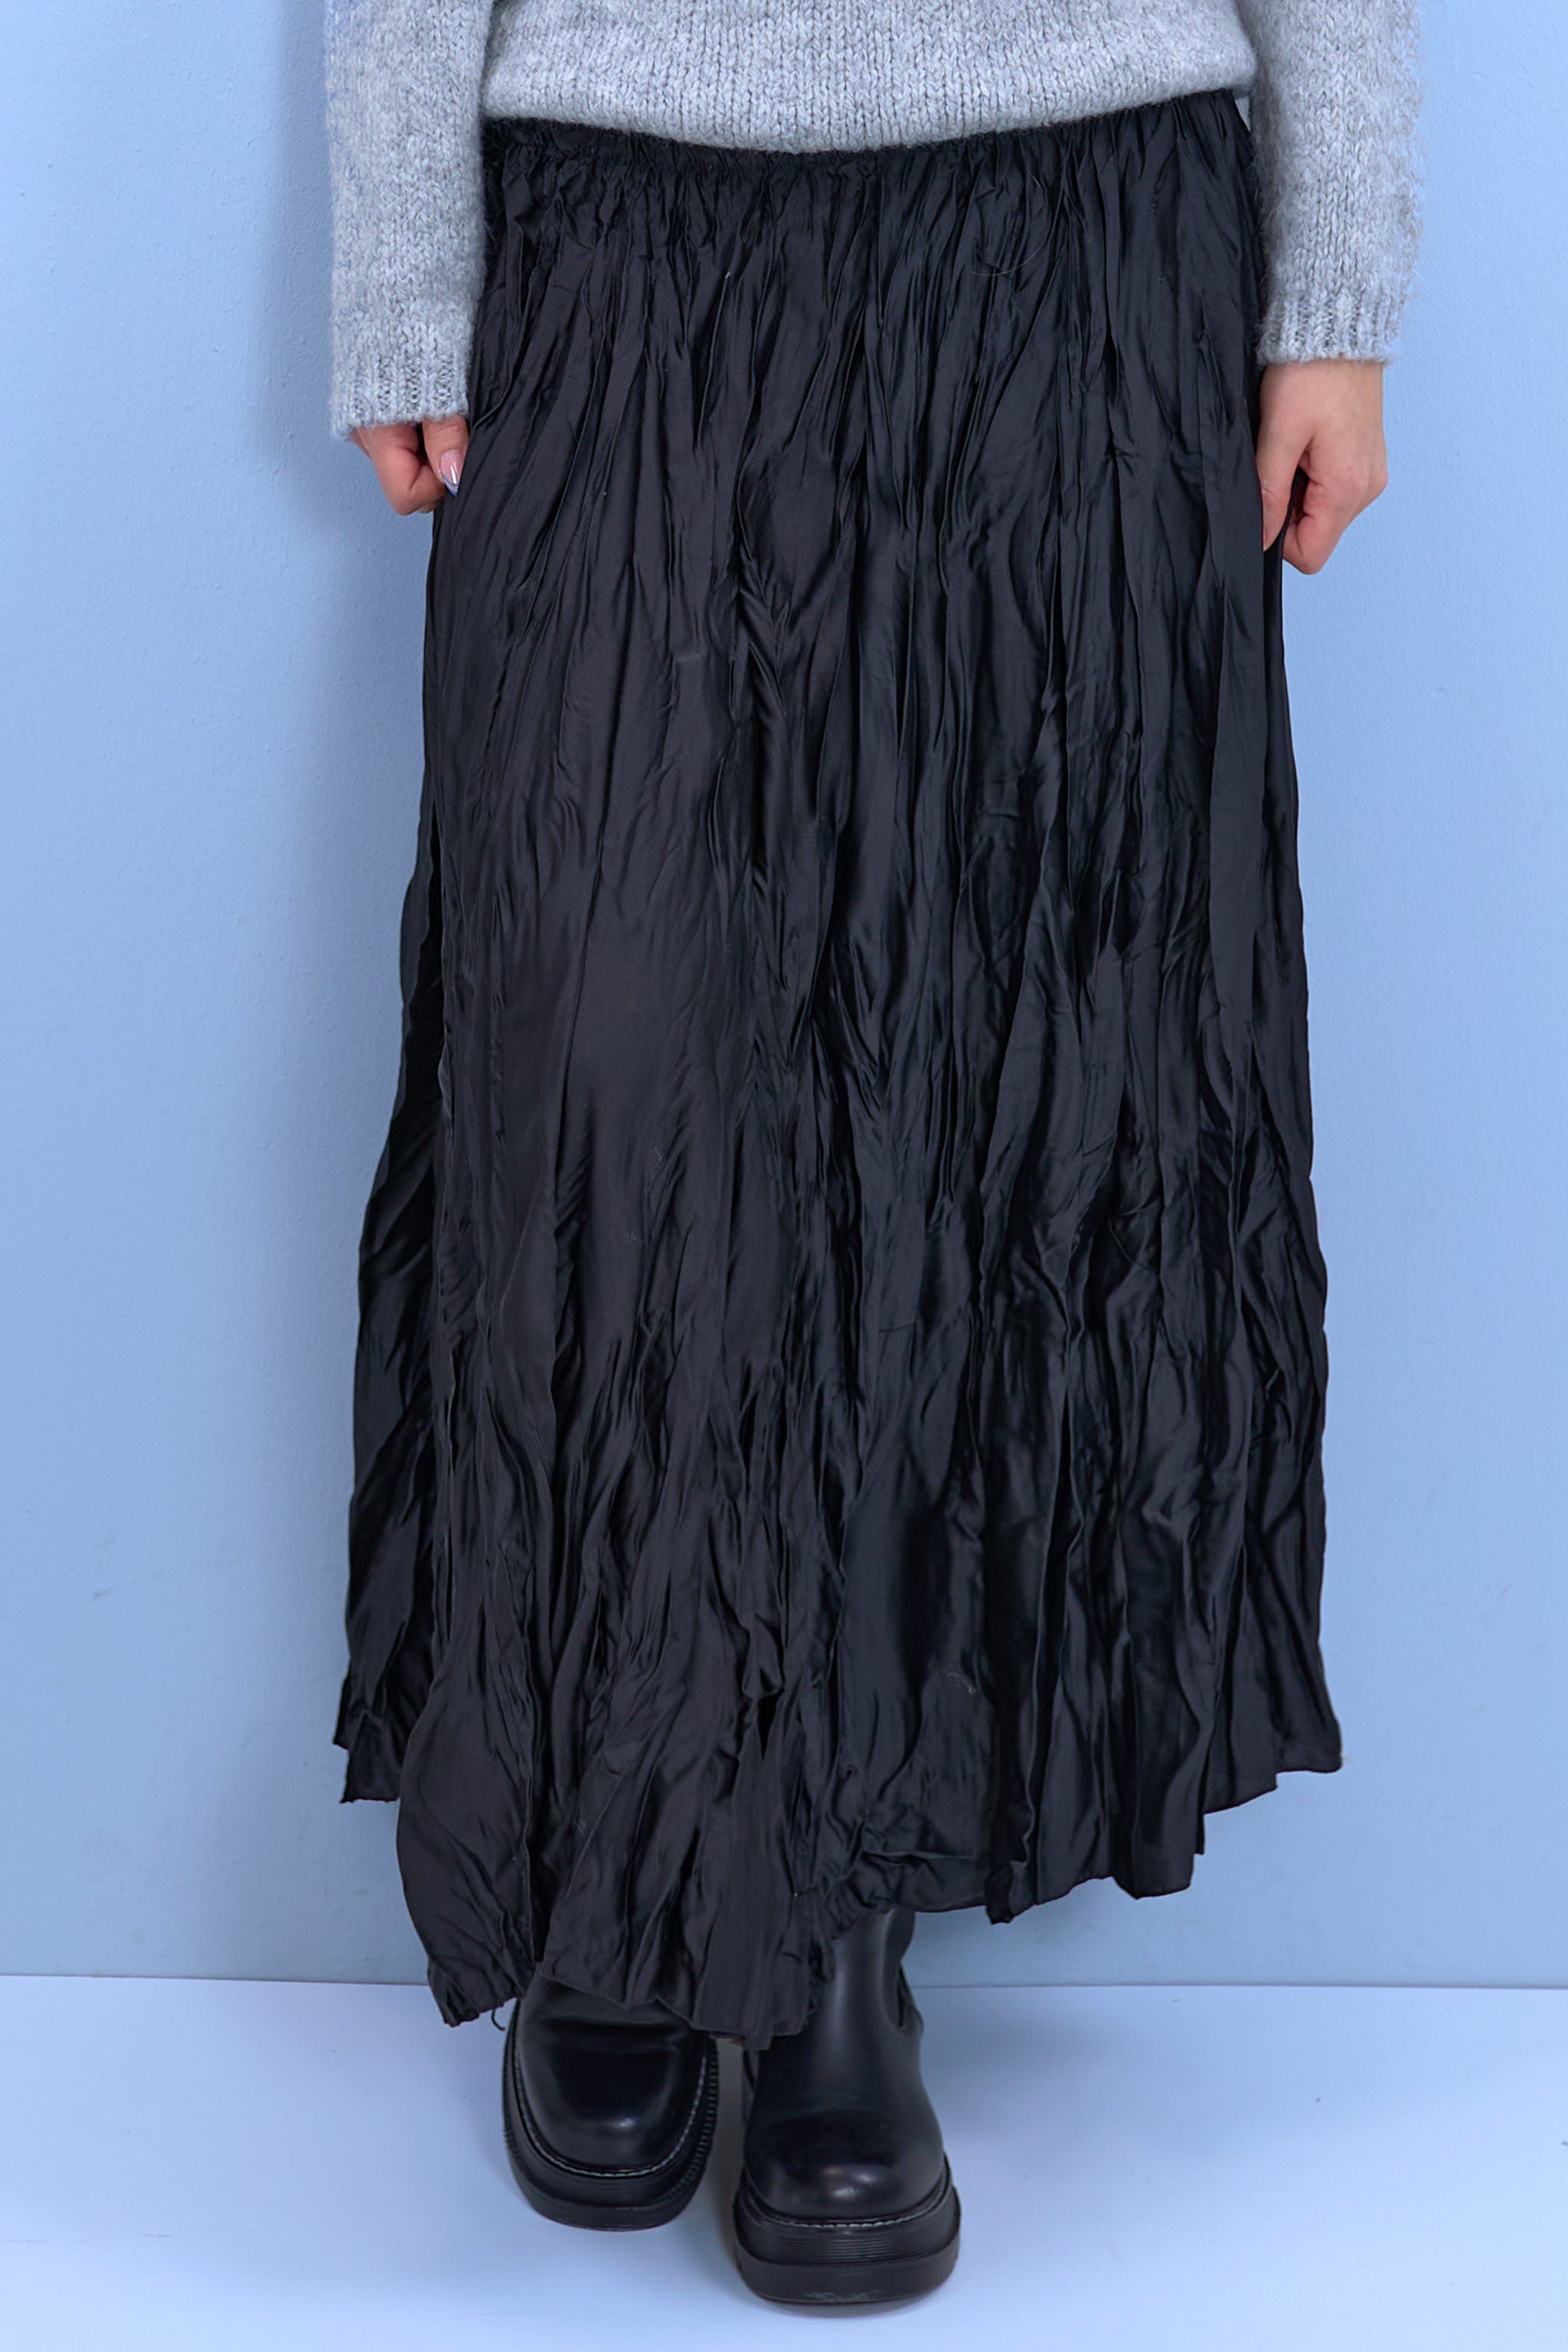 Skirt with a crinkled look, black